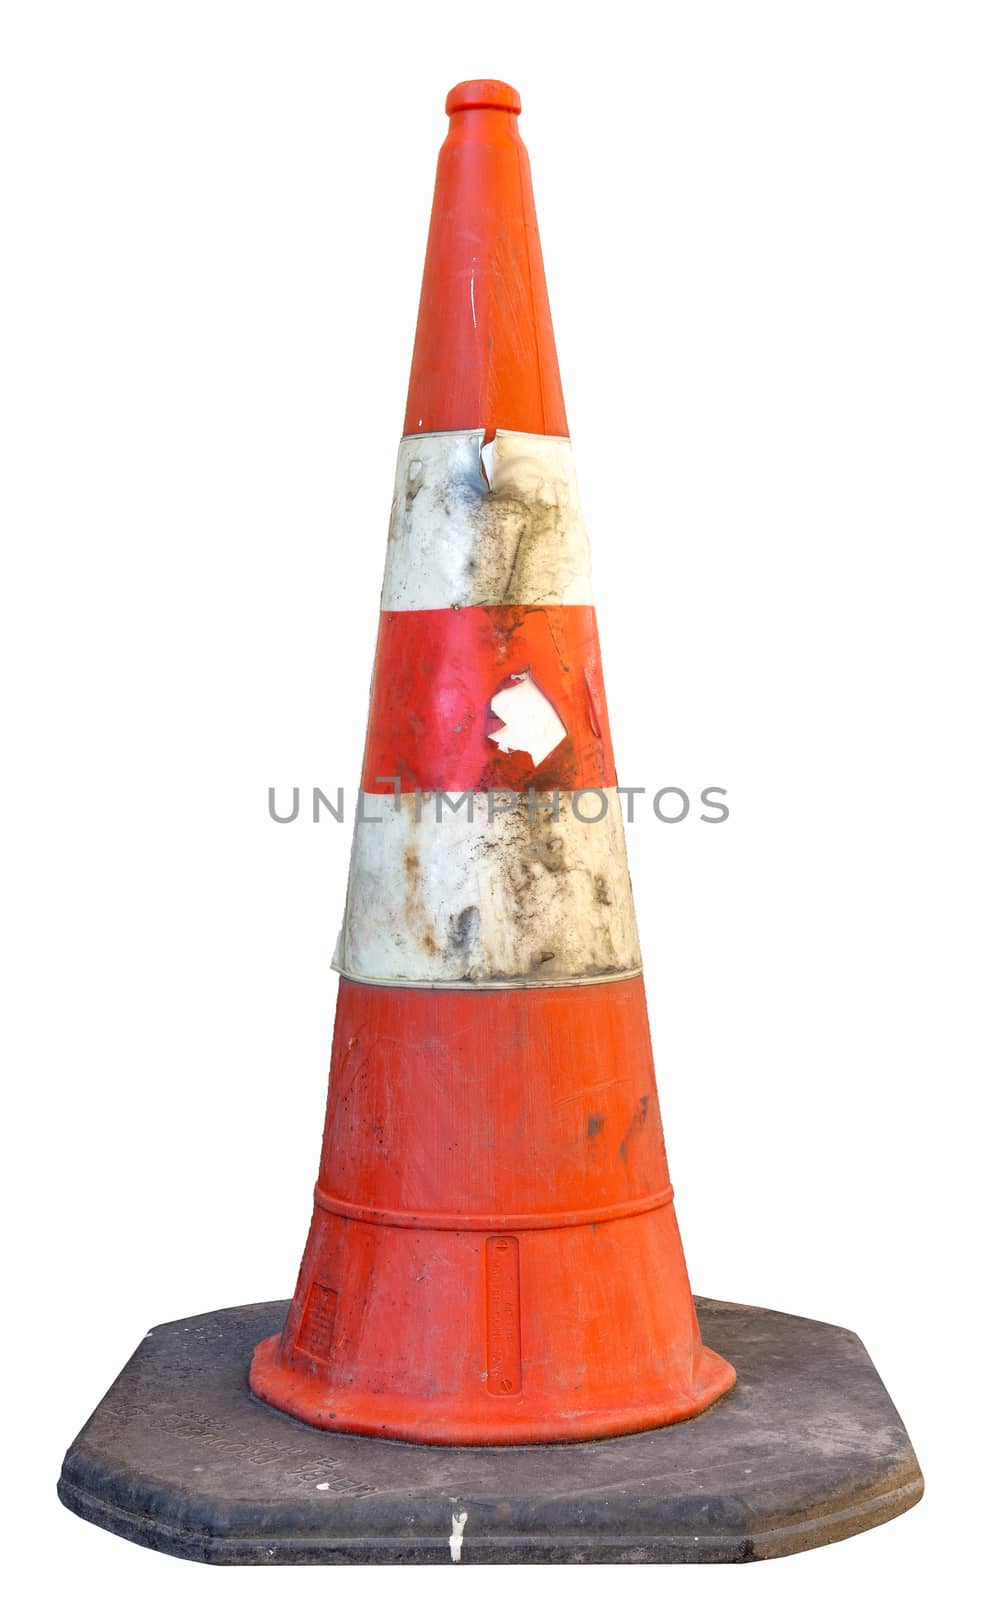 Dirty traffic cone isolated on white